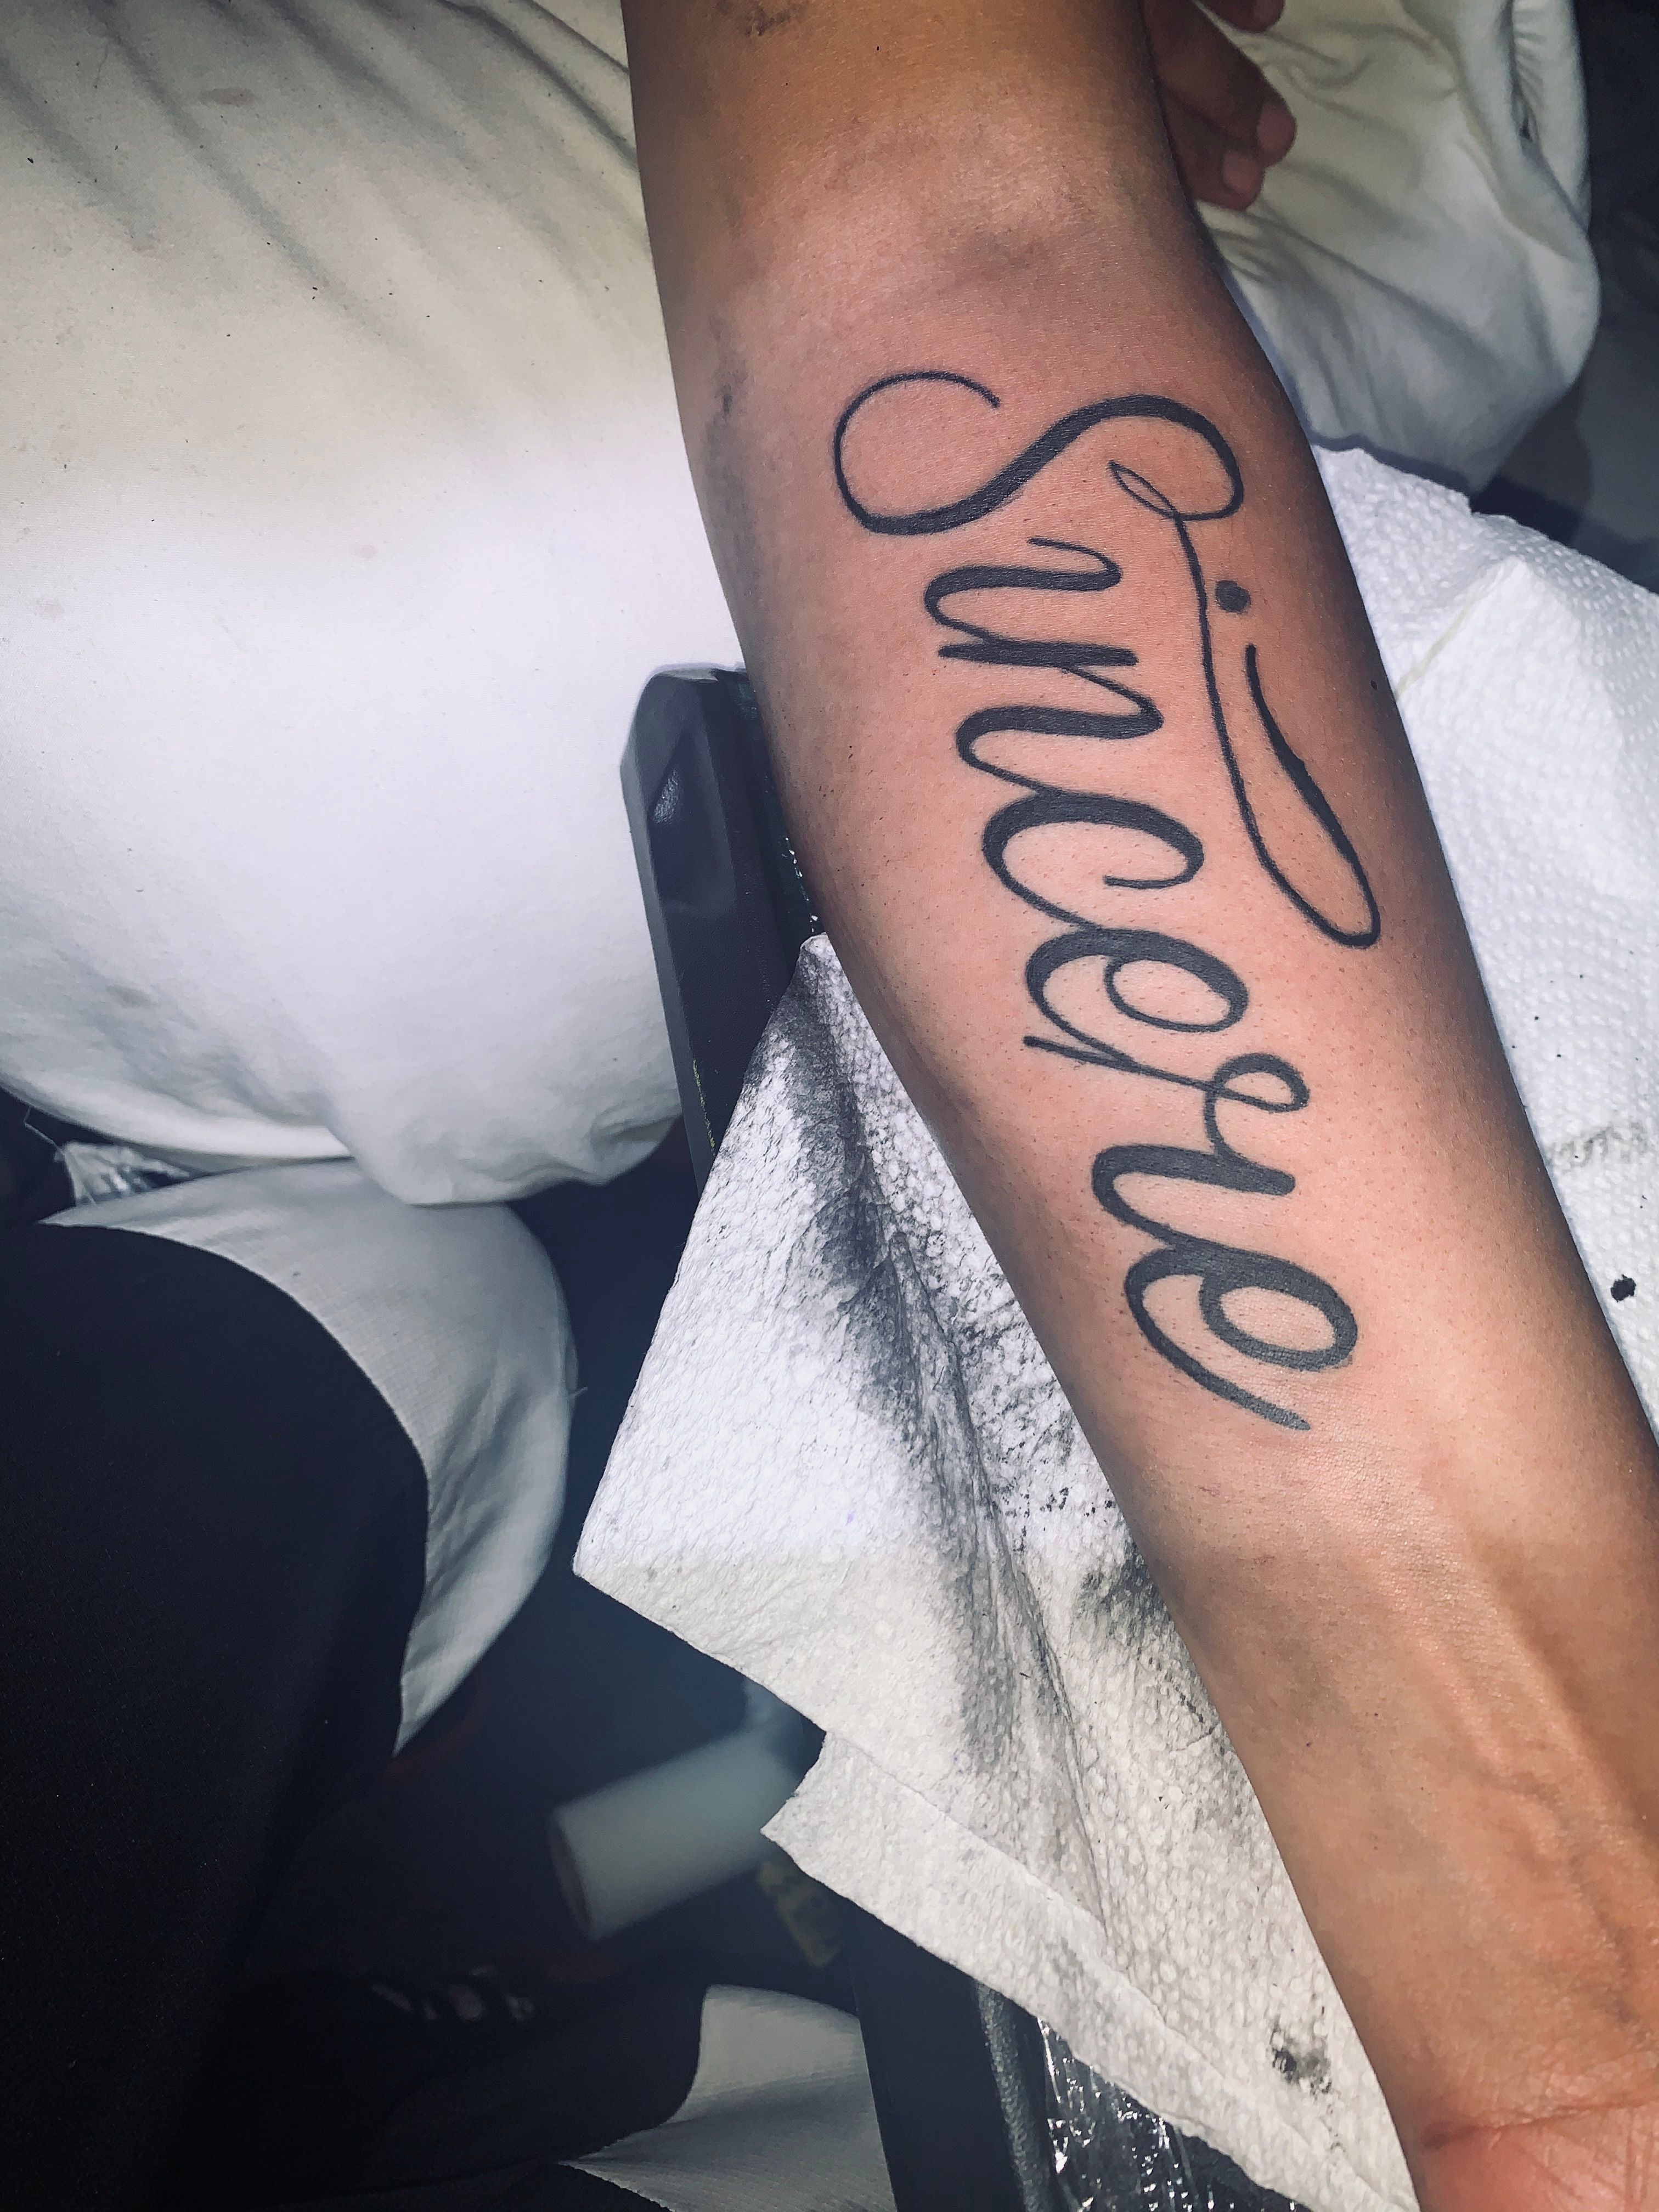 Saraha tattoos - Partner love custome one. . . . . Partner#love#custome#one# jeevan#tattoo#addict#ink#addict#artist#life#love#passion#to#be#profession#day#day#learning#freelancer#traveler#saraha  For appointment ☎️9567488506 | Facebook